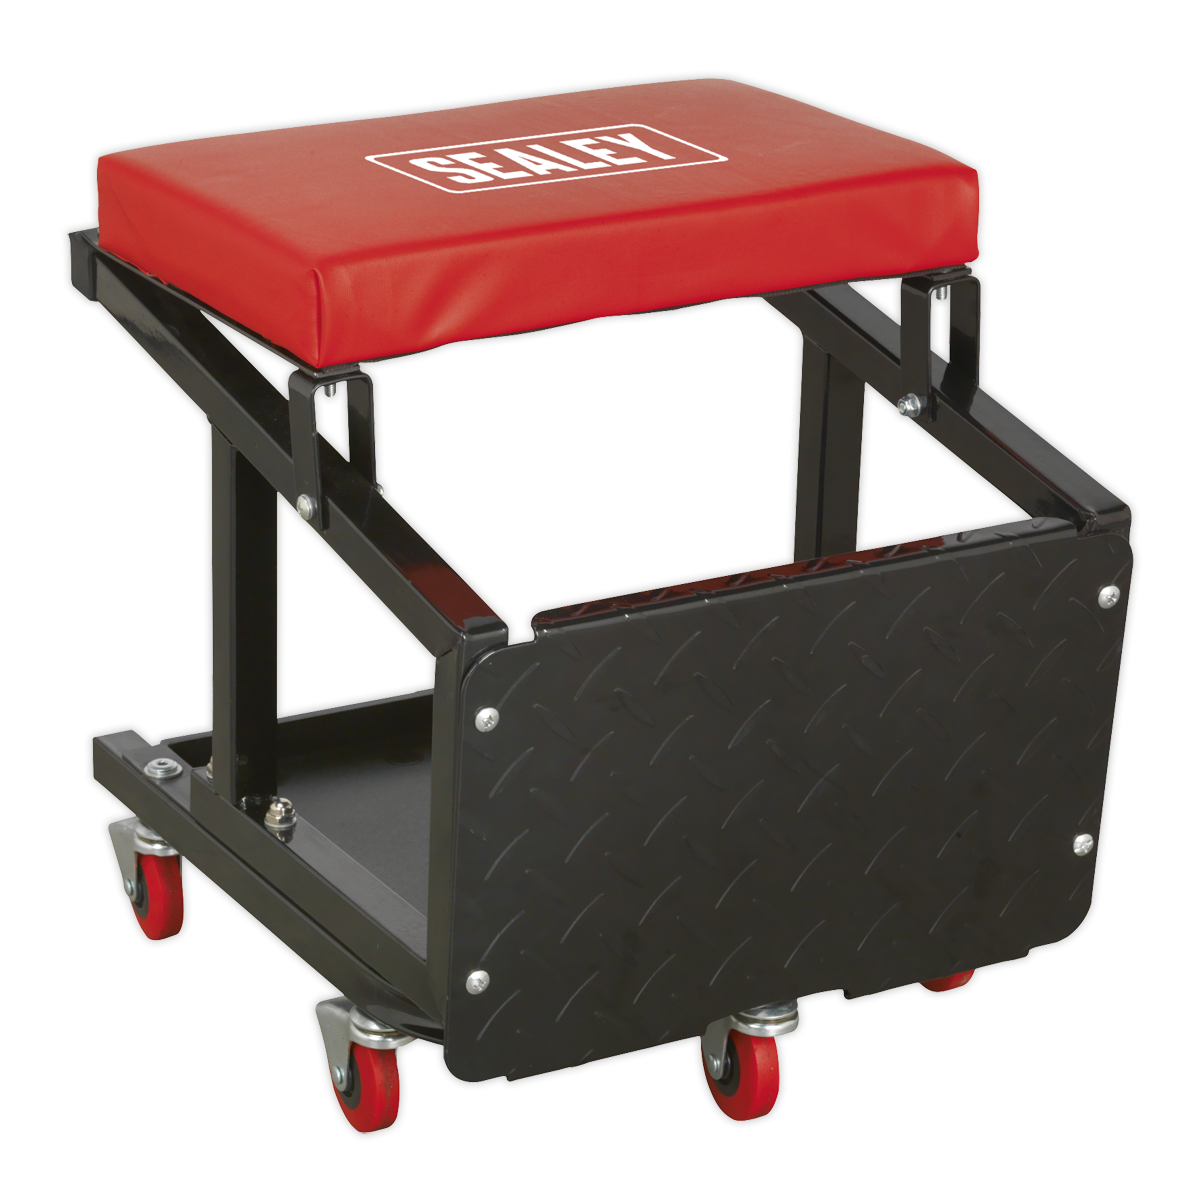 Sealey work seat with tool tray storage SCR16